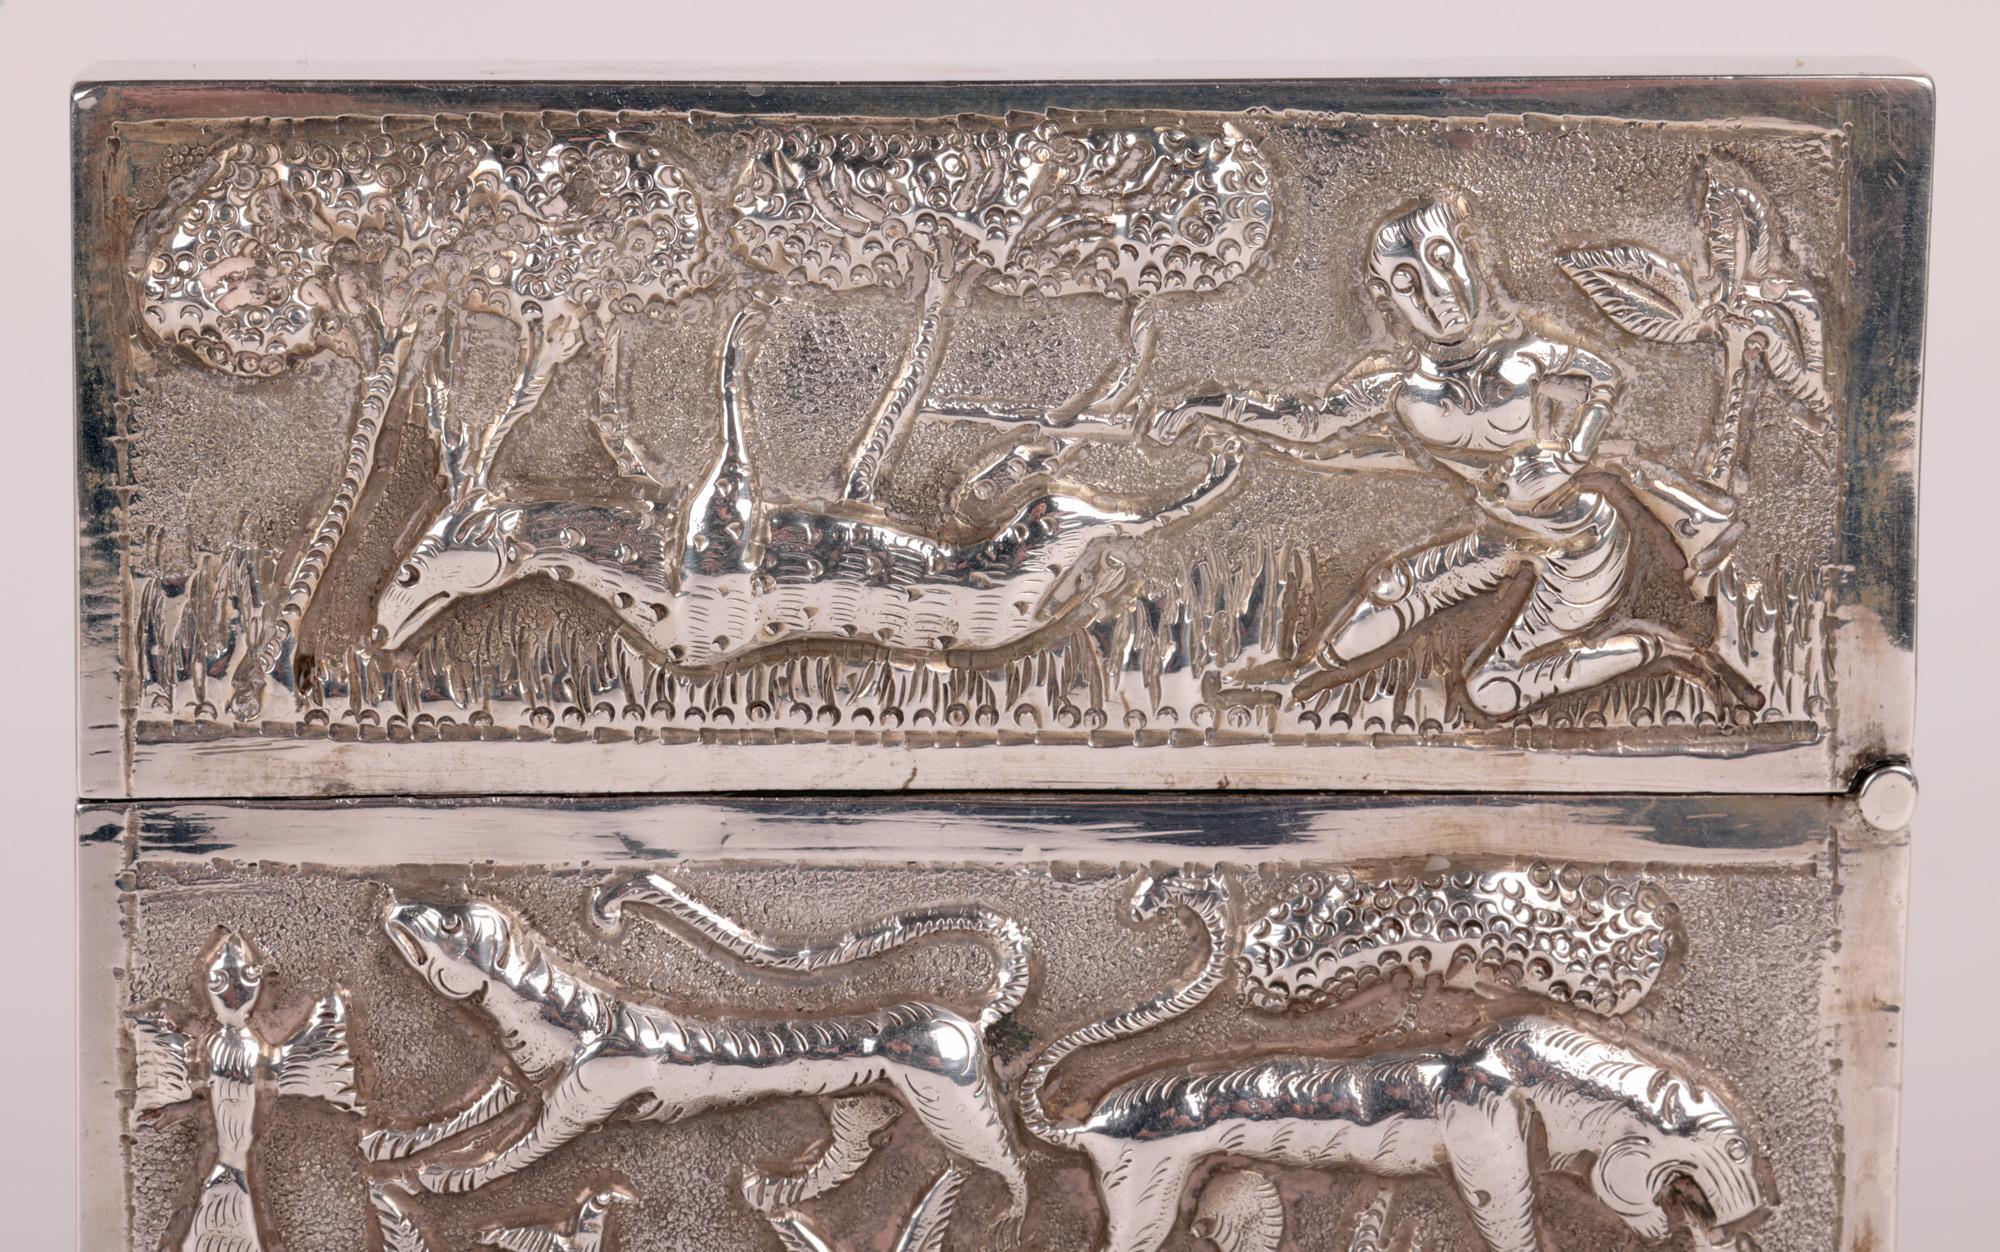 A fine quality and heavily made antique Indian silver card case decorated in repoussé with animals and other scenes probably dating from the early 20th century. The card case is of flat rectangular shape with a piano hinged cover with a shaped